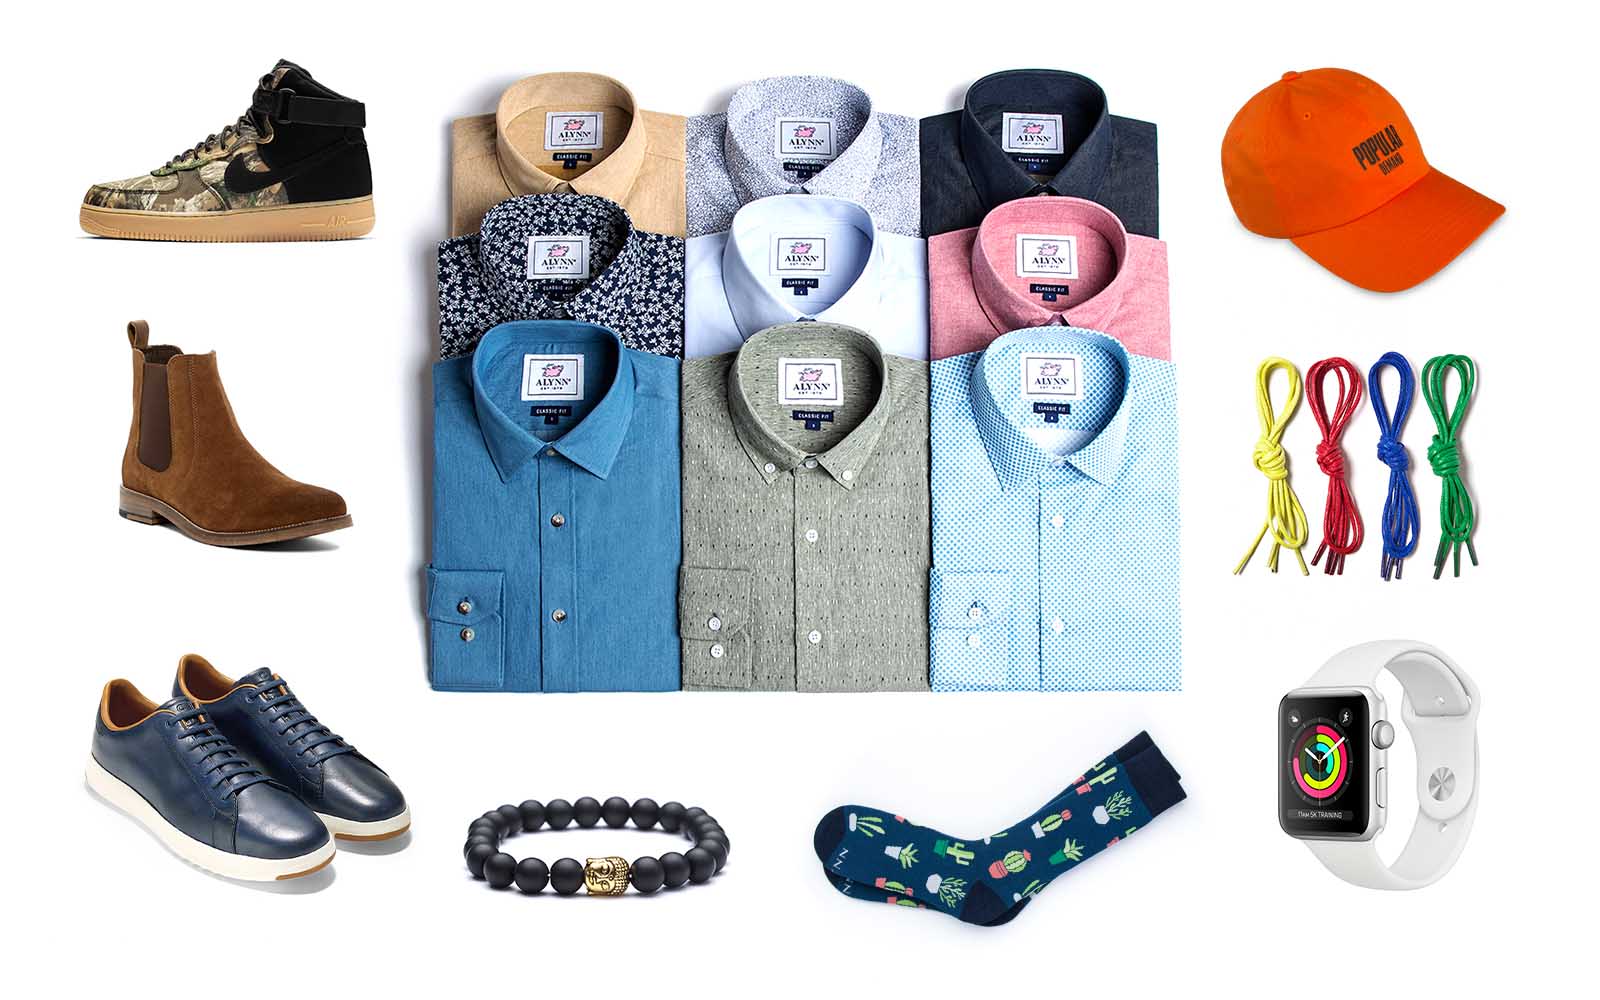 Men's Guide for What to Wear On a Night Out